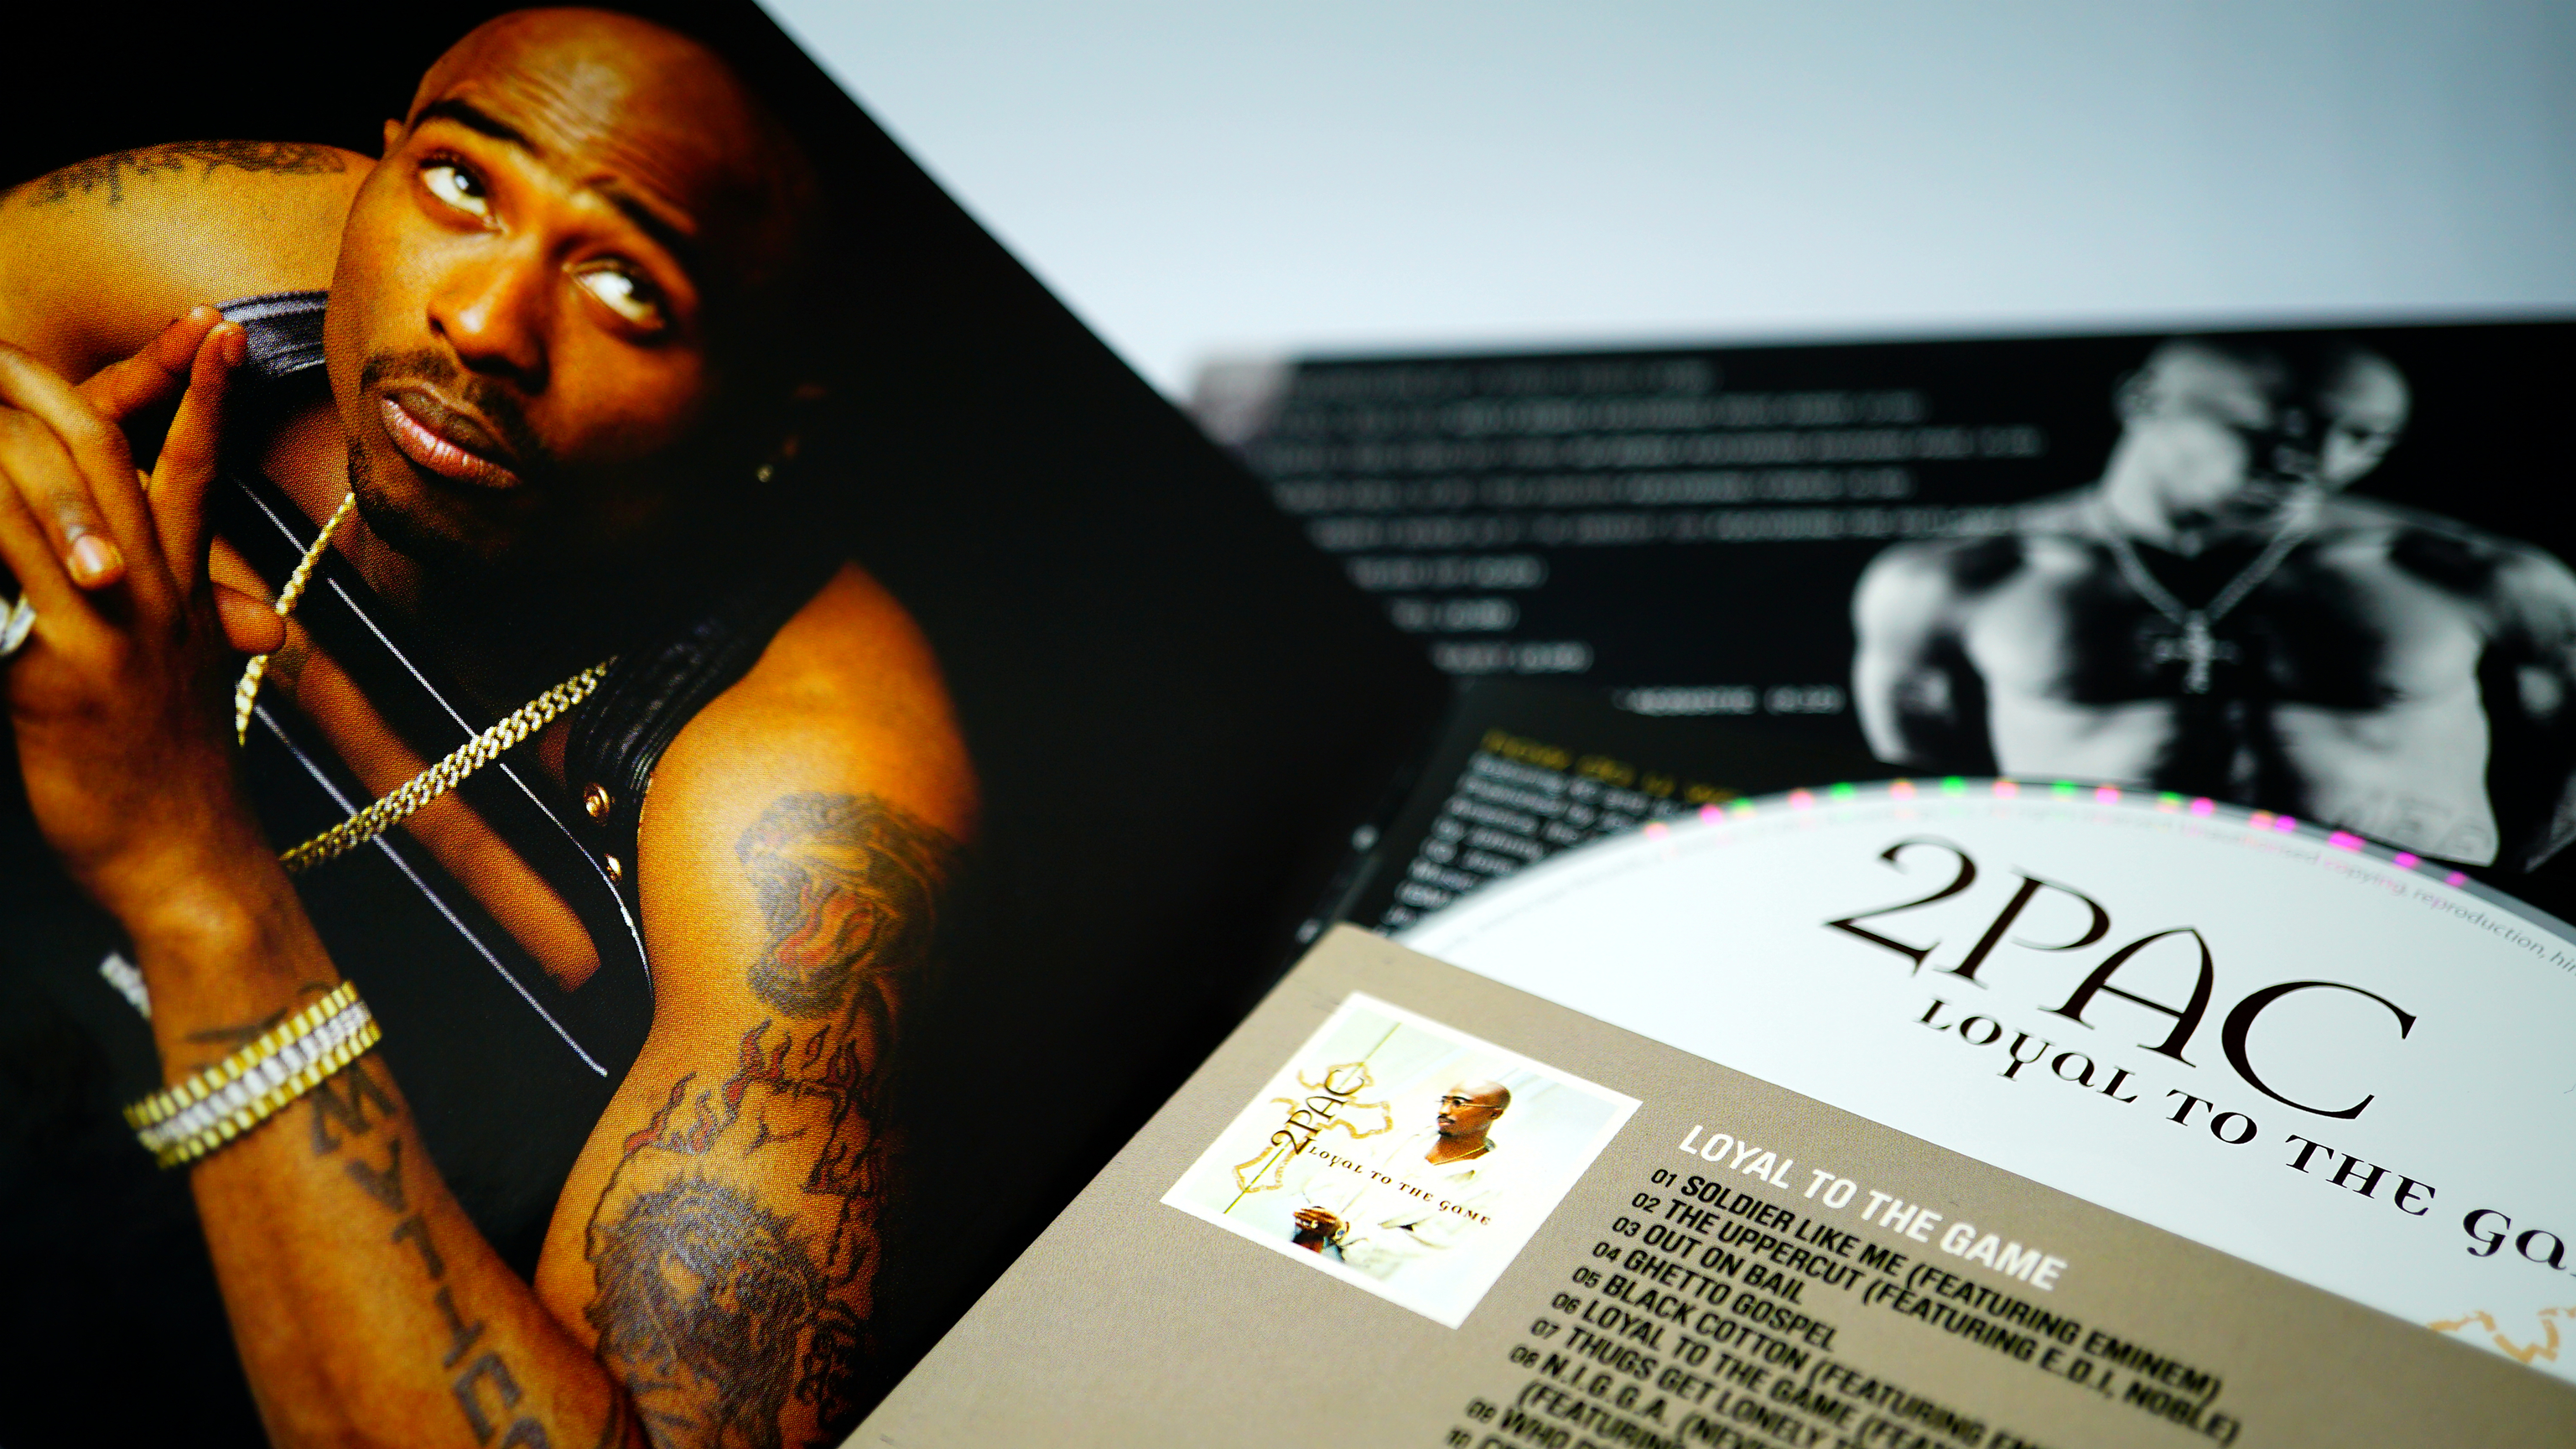 Collection of covers and CD inserts of the late Tupac Shakur.